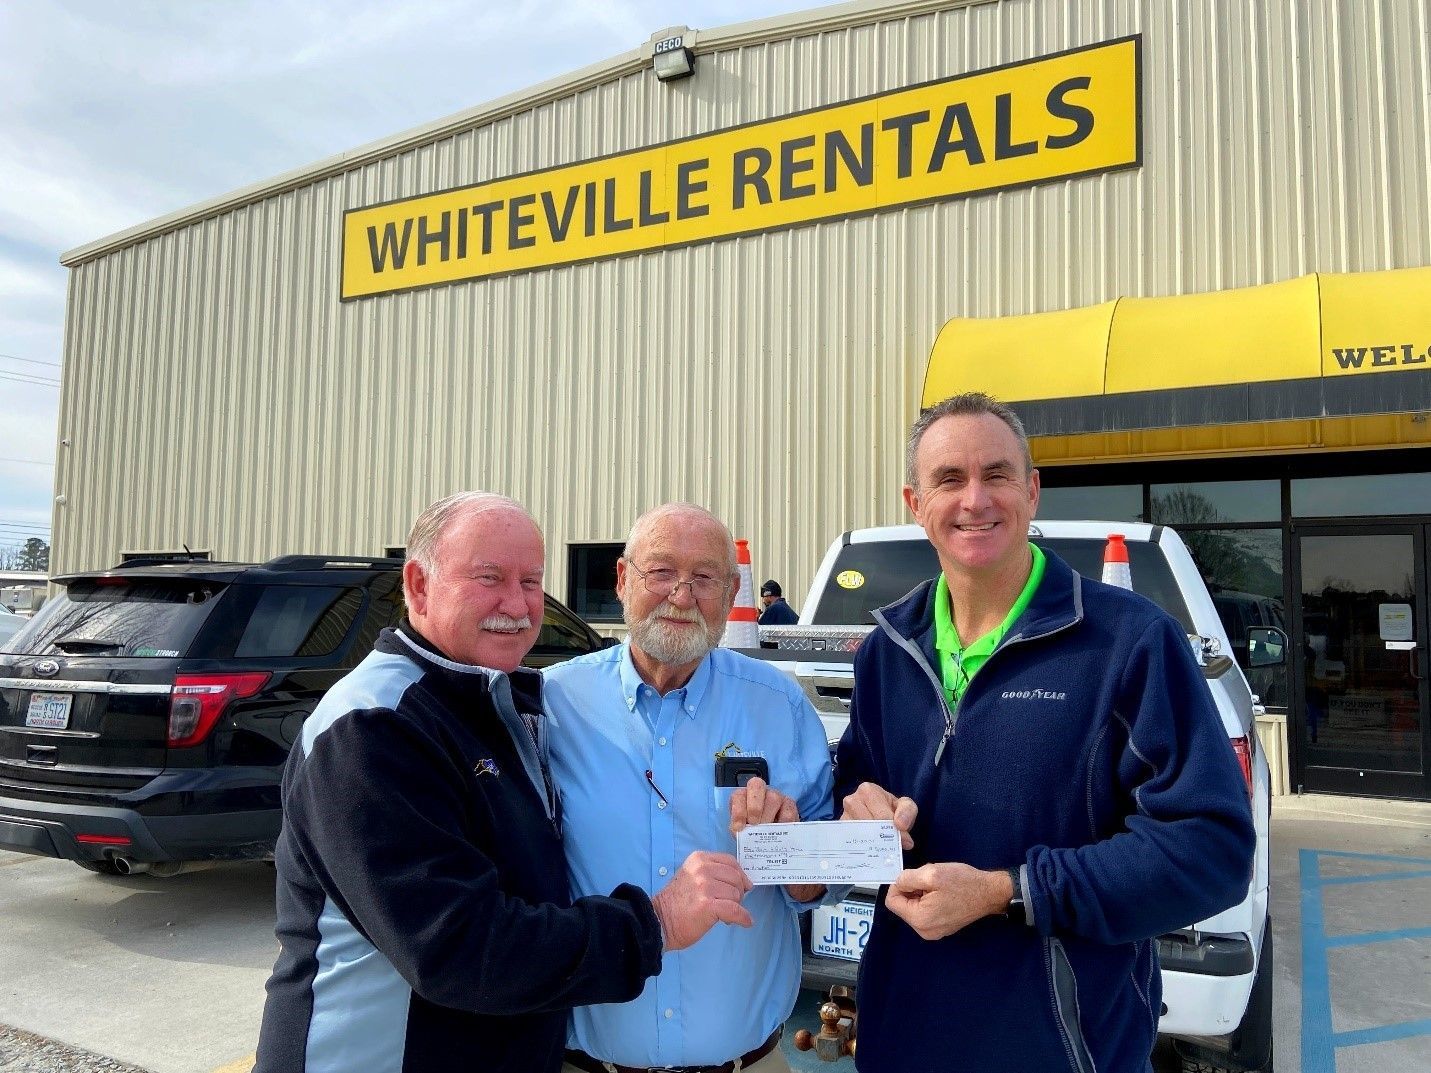 Boys and Girls Homes of North Carolina Trustee and Black’s Tire & Auto Service’s Rick Benton II, right, accepts a donation check for $5,000 from Ken Thomas of Whiteville Rentals, center, alongside Ricky Benton of Black’s Tire & Auto Service.